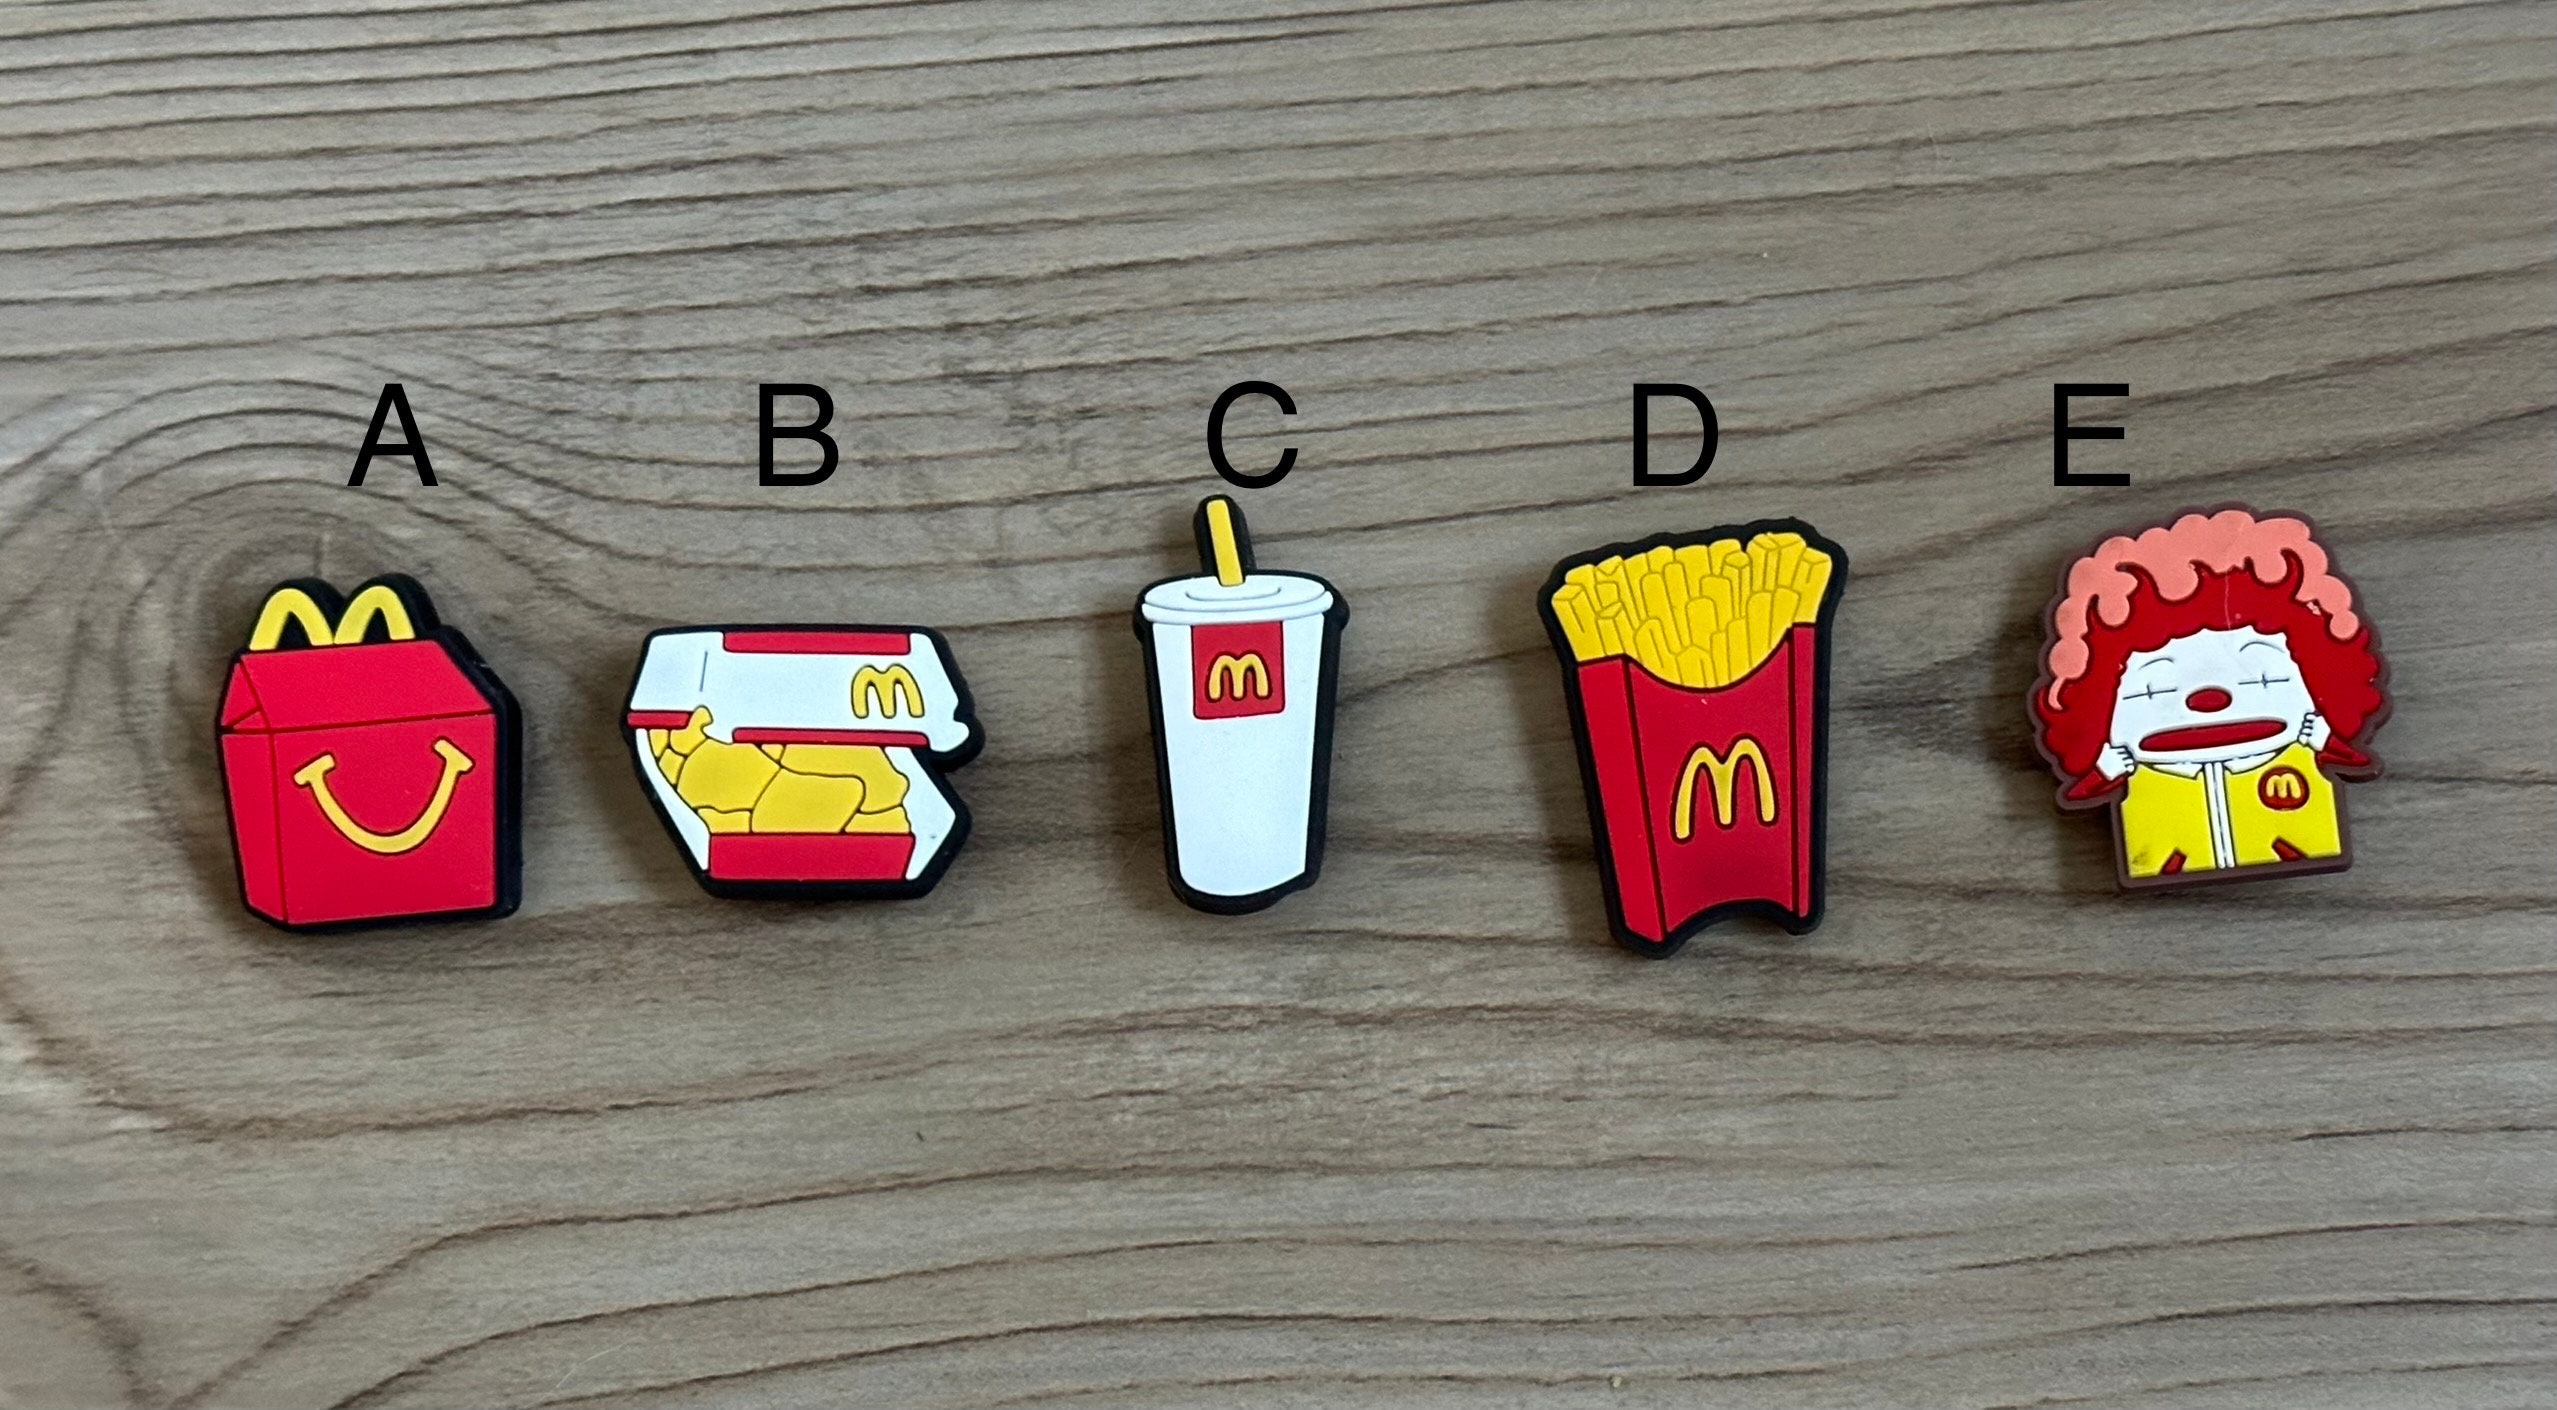 13PCS fast food shoe Charms Texas Food Fried Chicken Hamburger Drink Charm  Shoes Accessories Cute Decorations fit Sandals Bracelets Gift for Teens